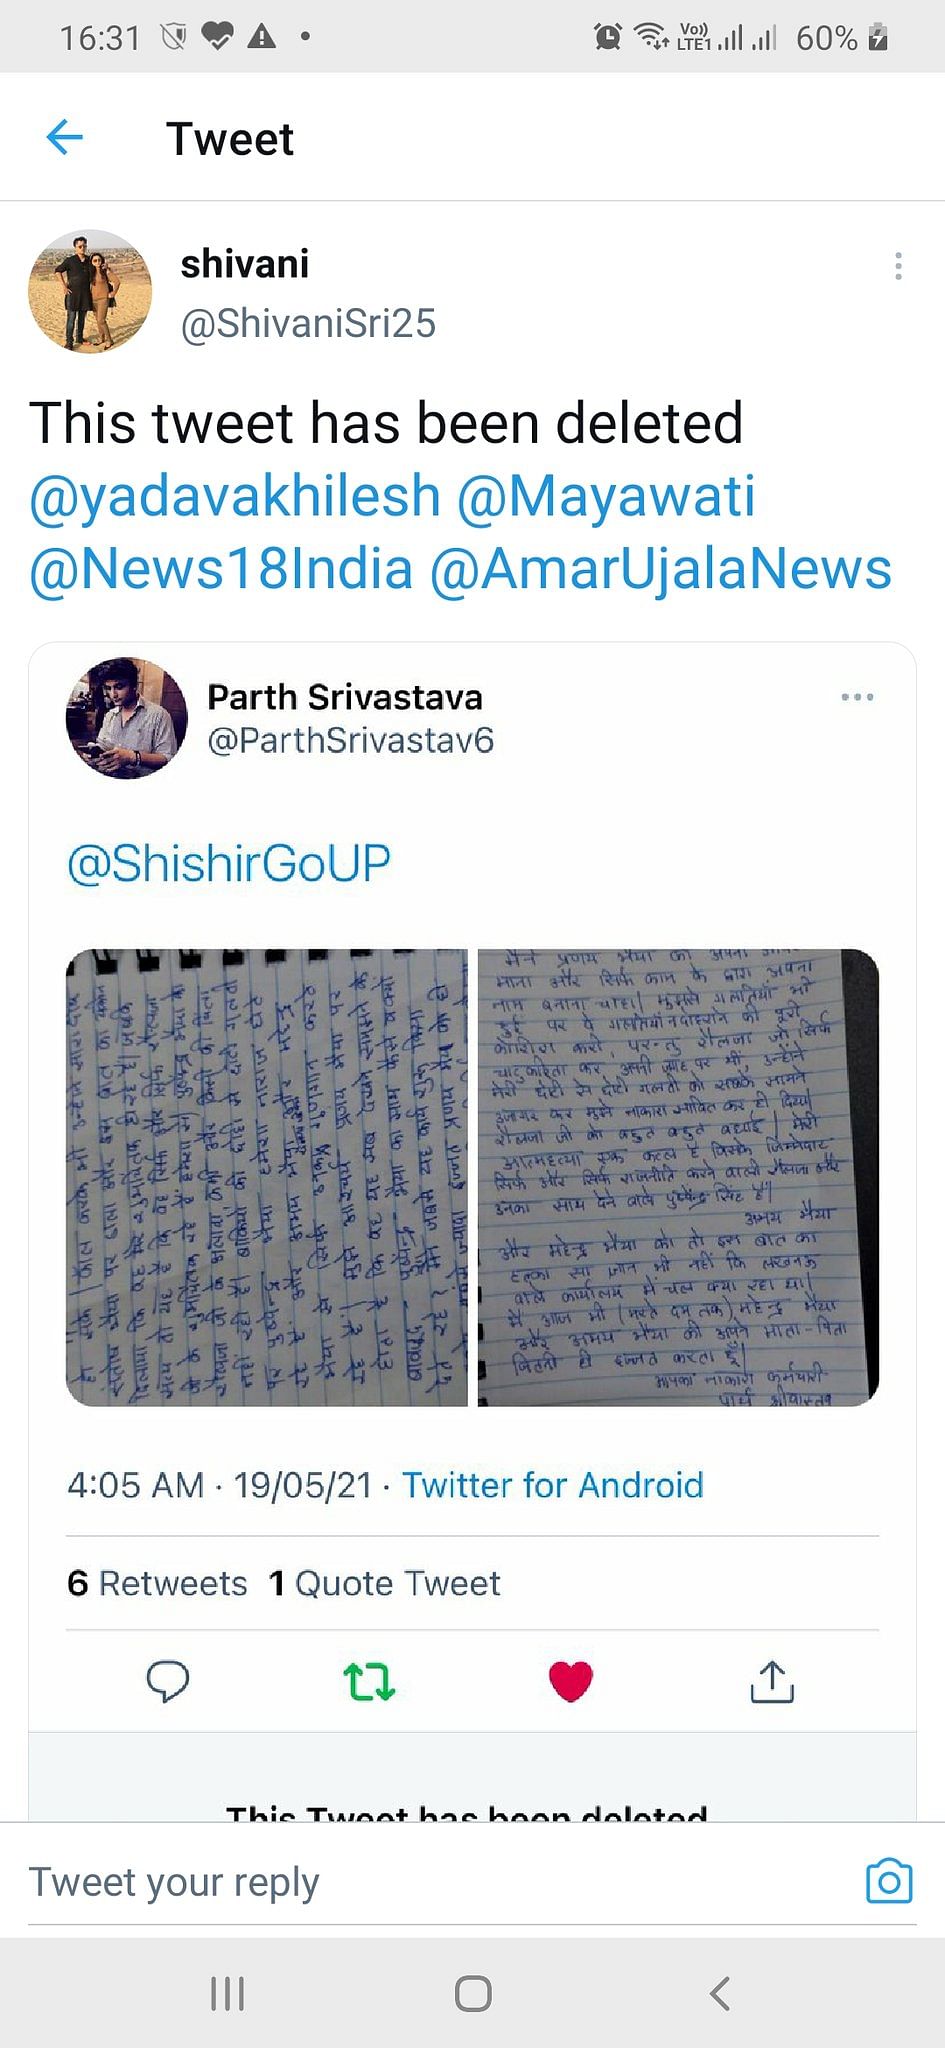 Family of Parth Srivastava, who managed the social media account for the UP government, has alleged harassment.